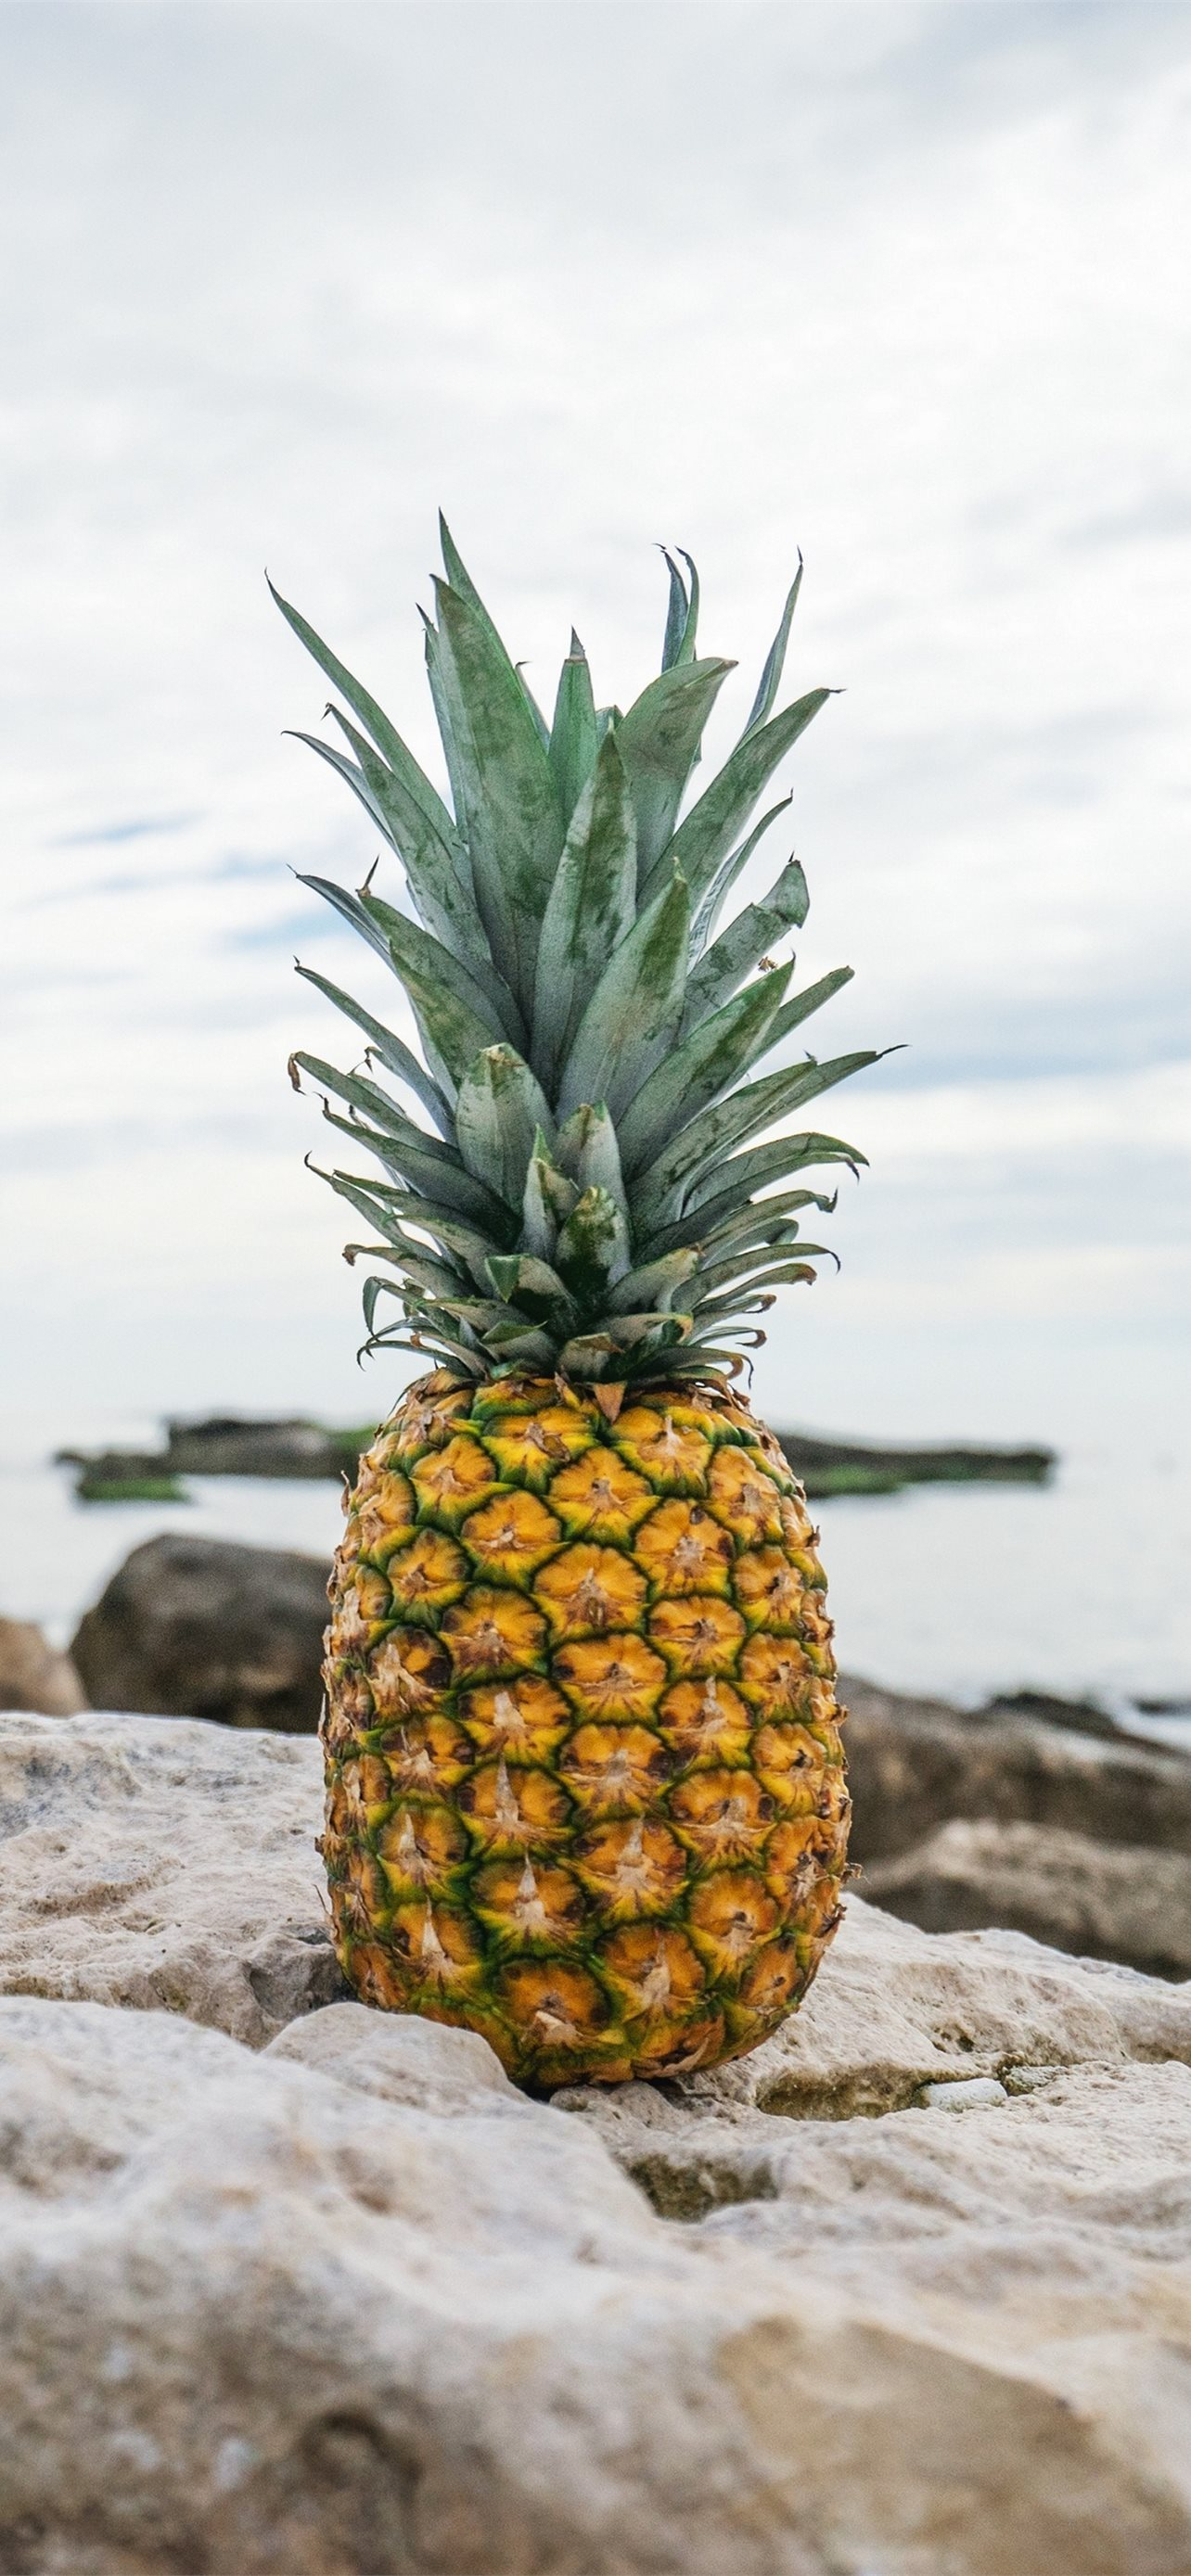 1284x2778 Pineapple Rocks Beach iPhone Wallpapers Free Download